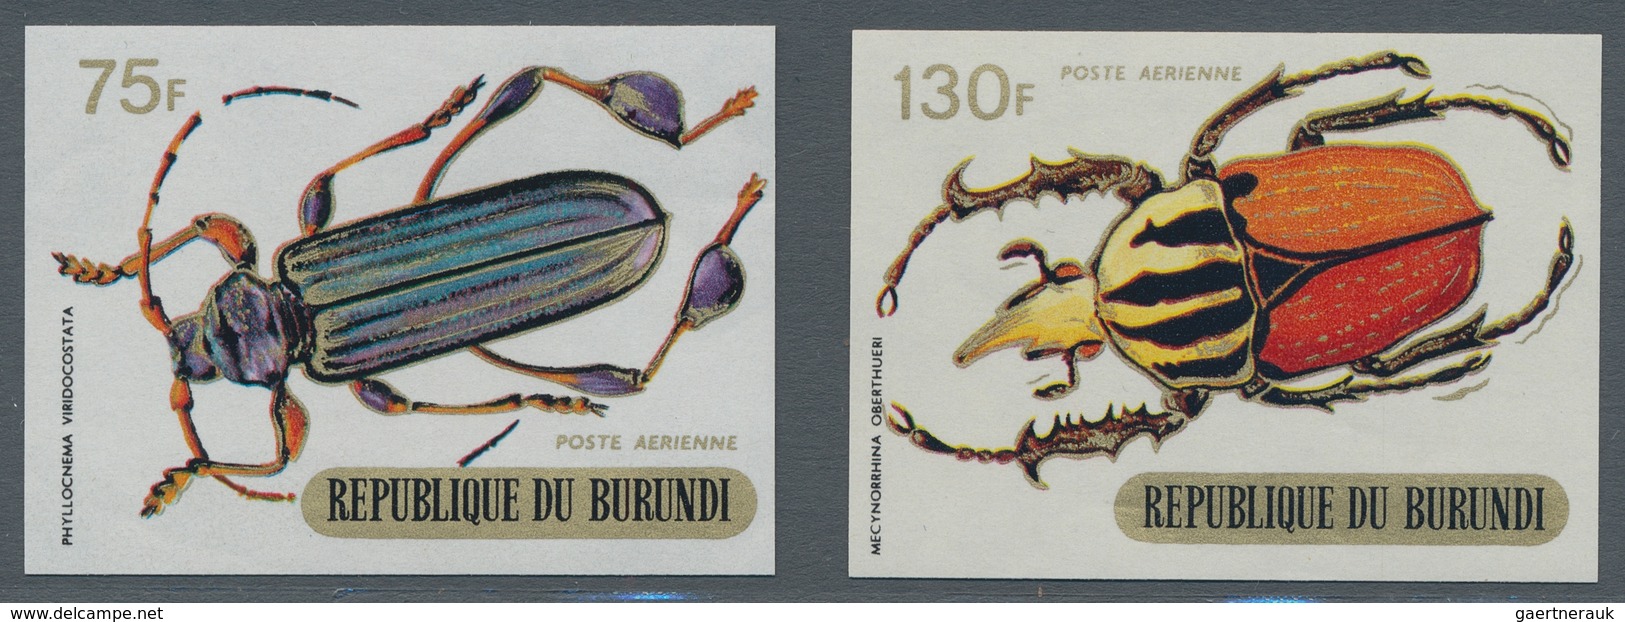 Thematik: Tiere-Insekten / animals-insects: 1970, BURUNDI: Beetles complete set of nine IMPERFORATE